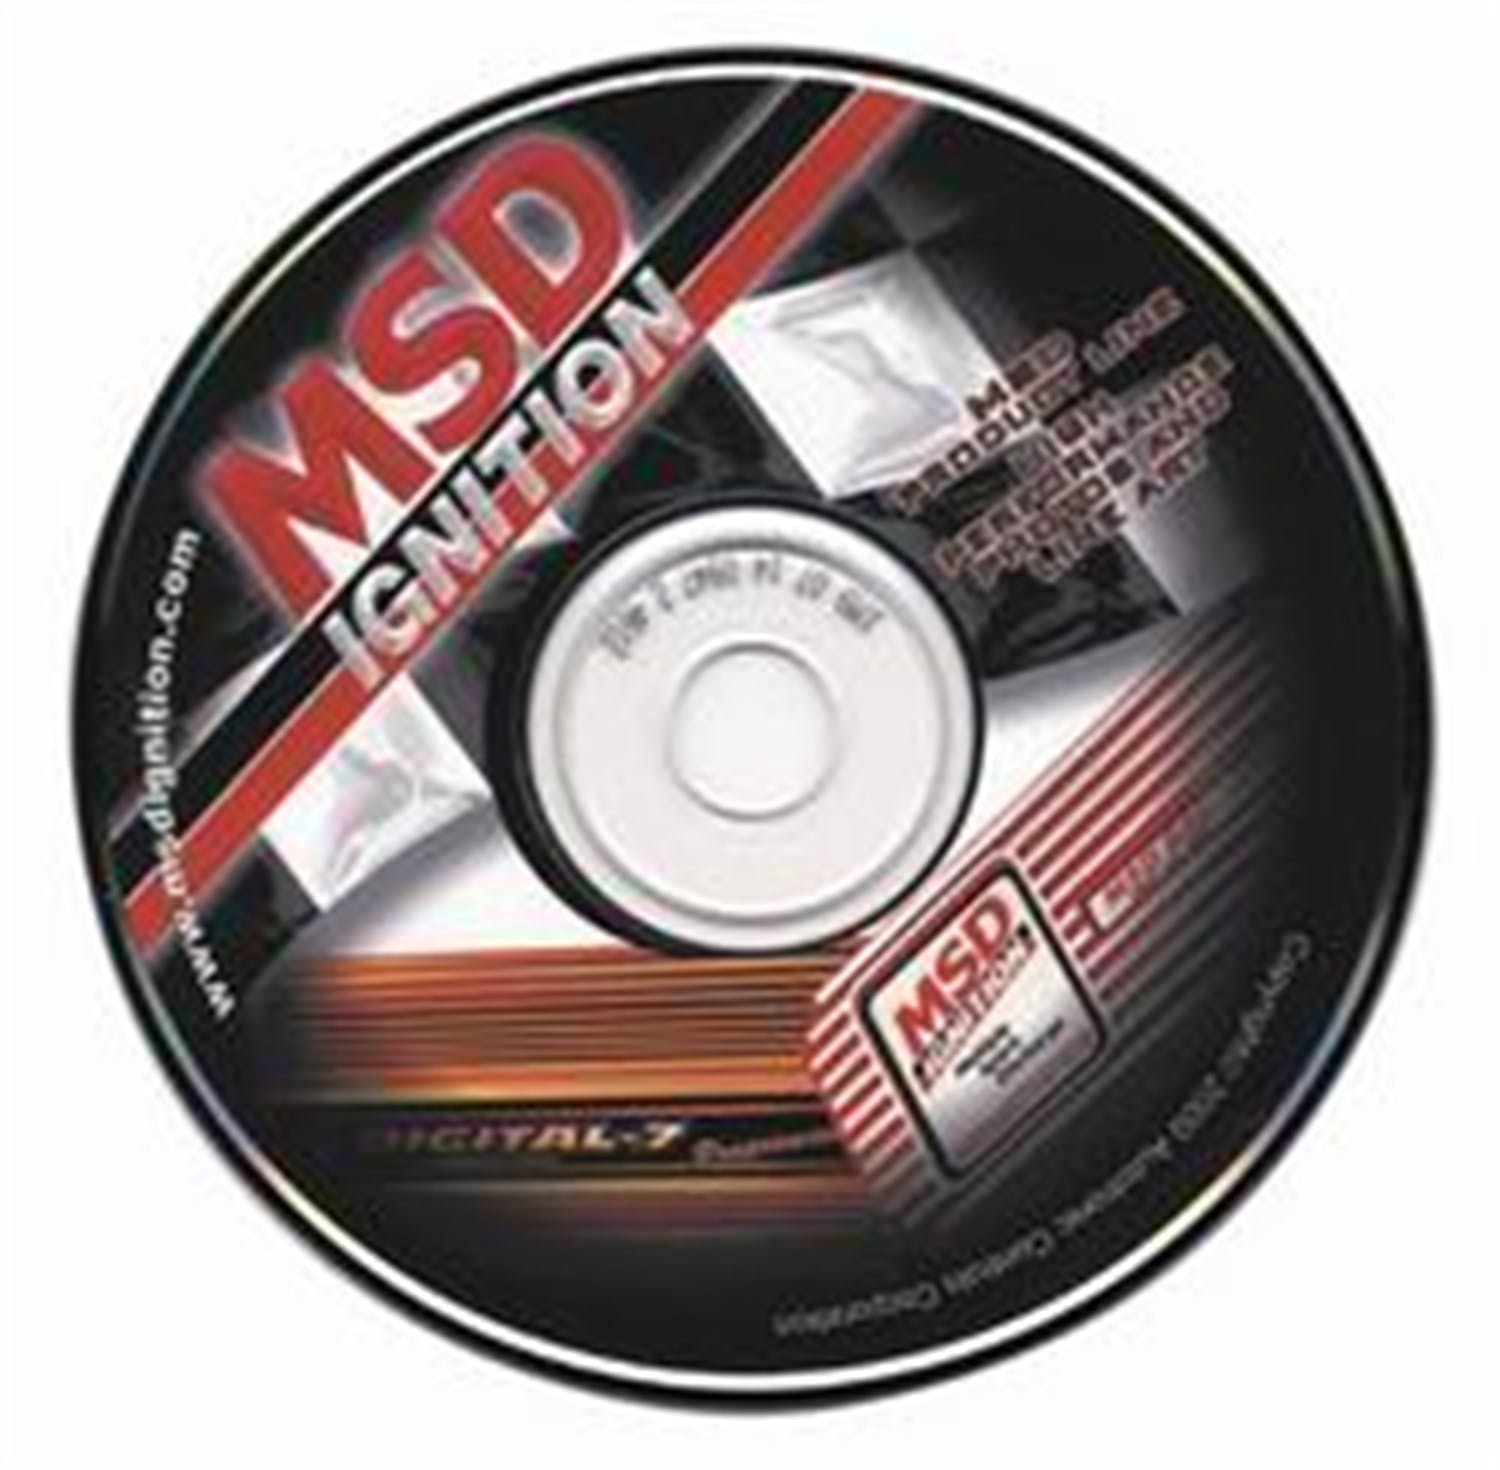 MSD Performance 9606 MSD Product Catalog on CD Rom